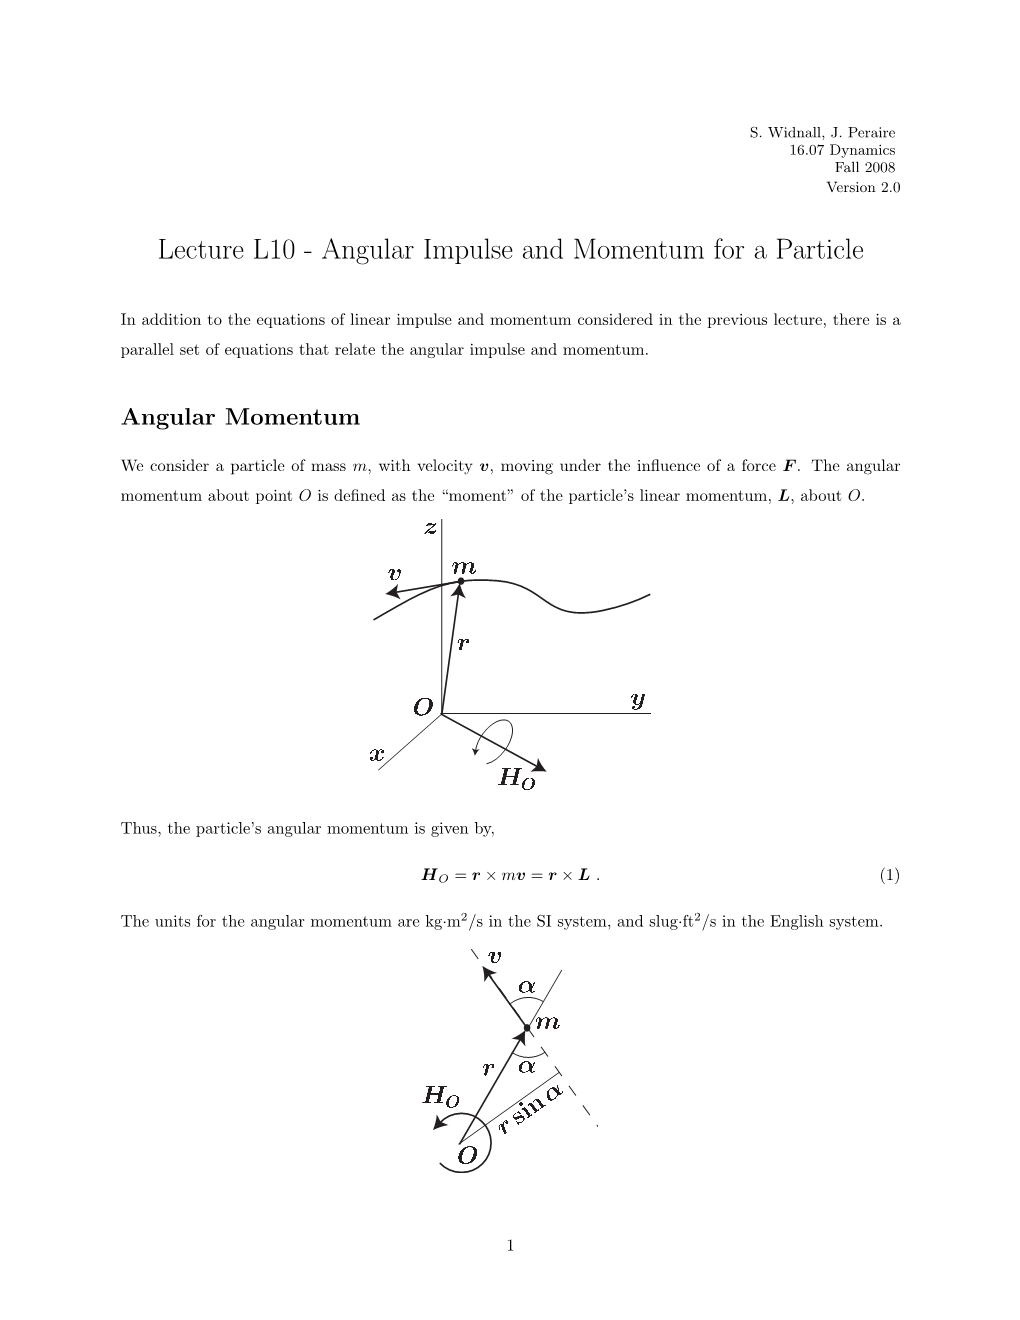 Lecture L10 - Angular Impulse and Momentum for a Particle